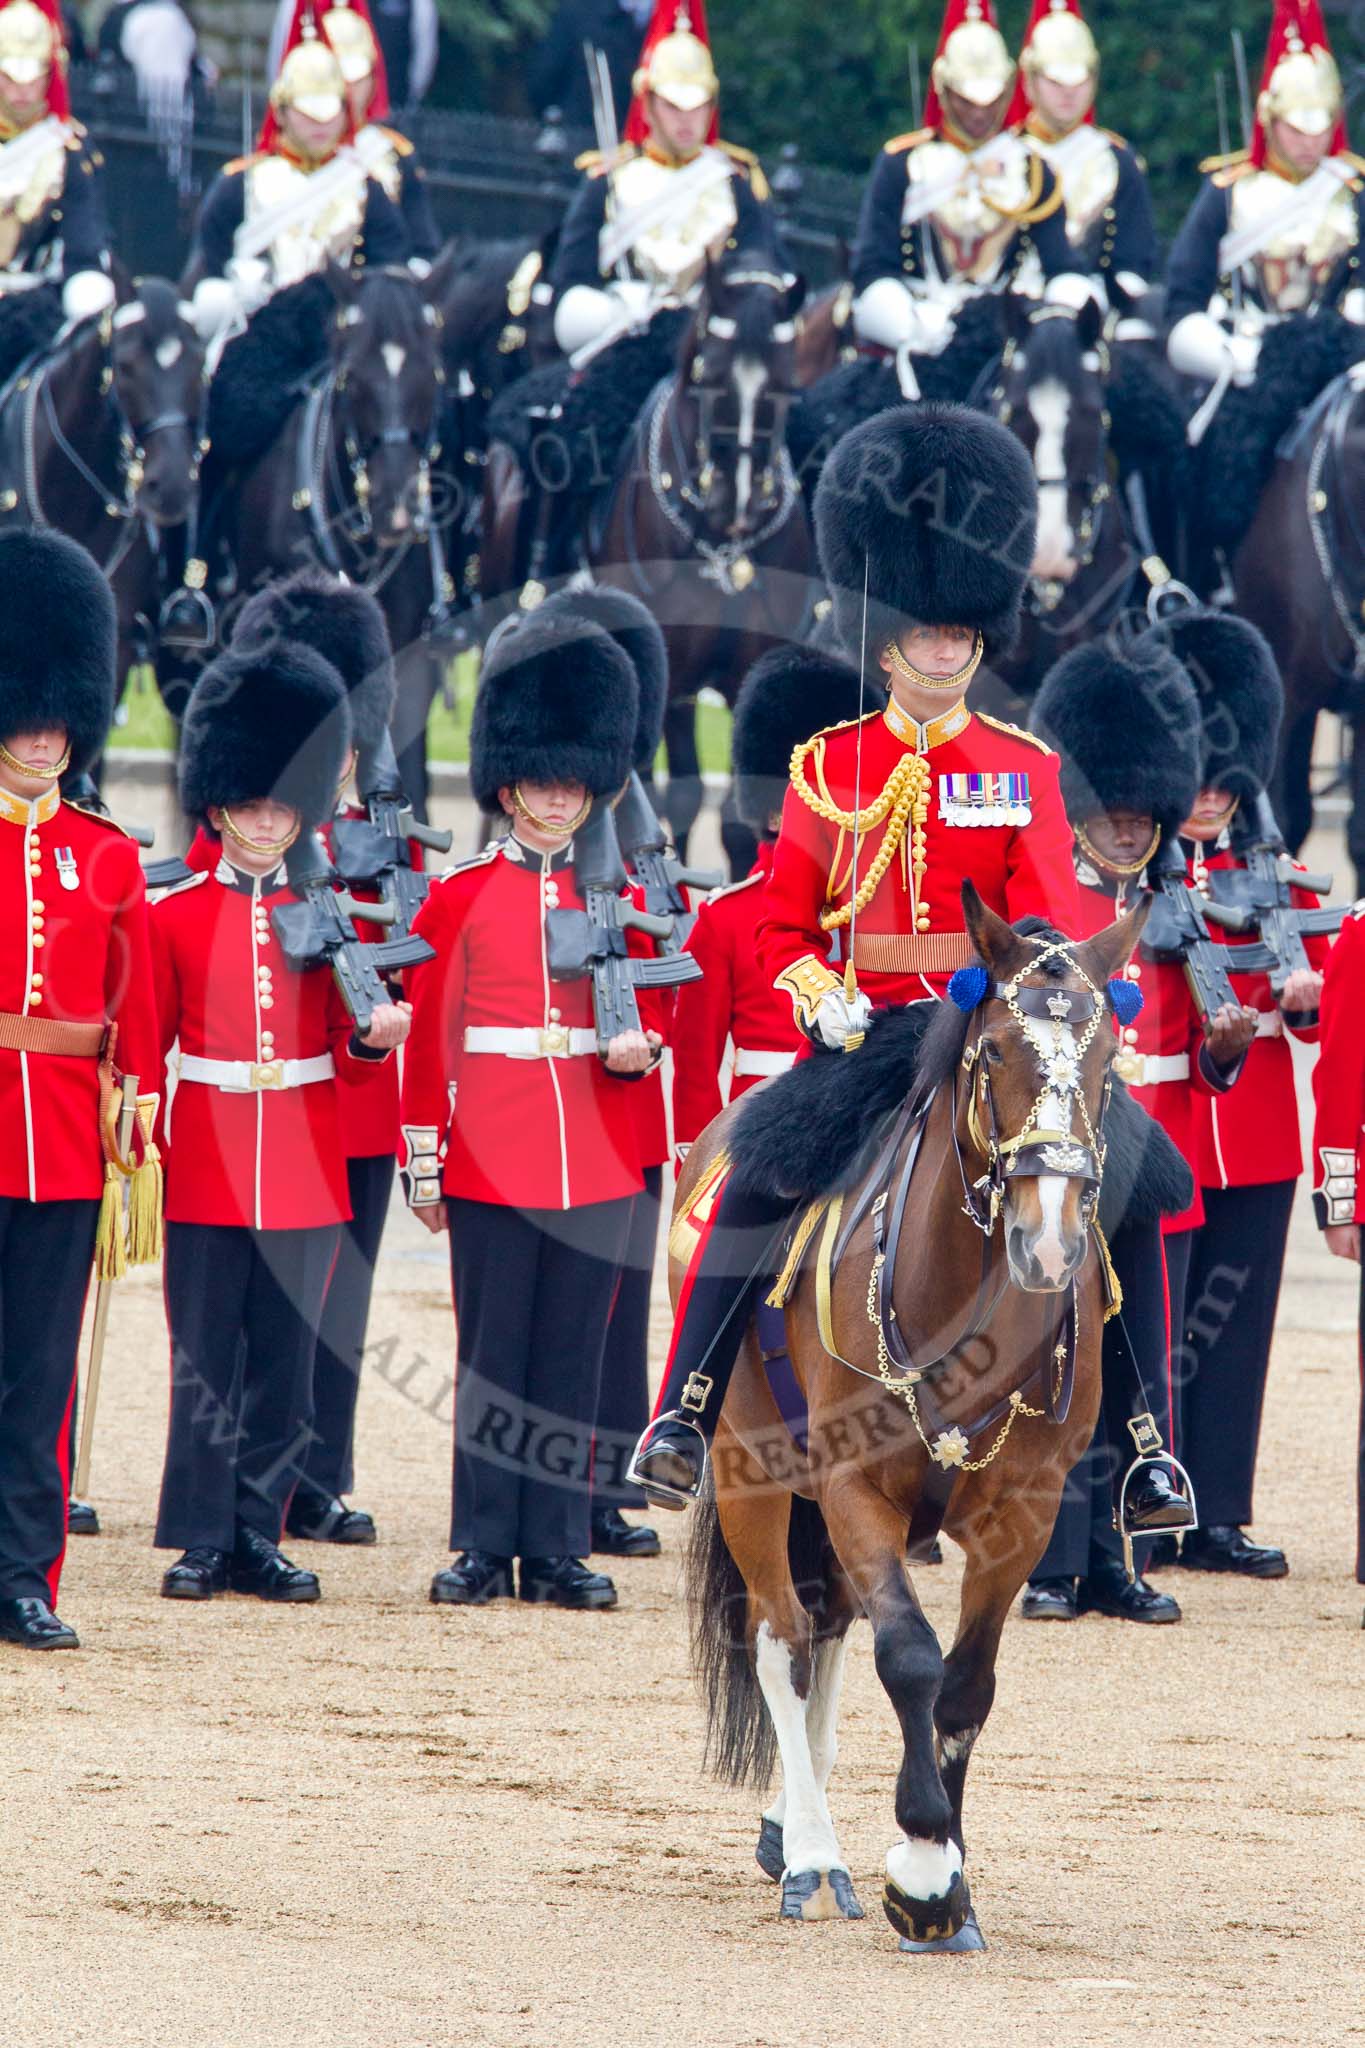 Trooping the Colour 2011: The Field Officer, Lieutenant Colonel Lincoln P M Jopp, behind him No. 2 Guard, B Company Scots Guards..
Horse Guards Parade, Westminster,
London SW1,
Greater London,
United Kingdom,
on 11 June 2011 at 11:20, image #201